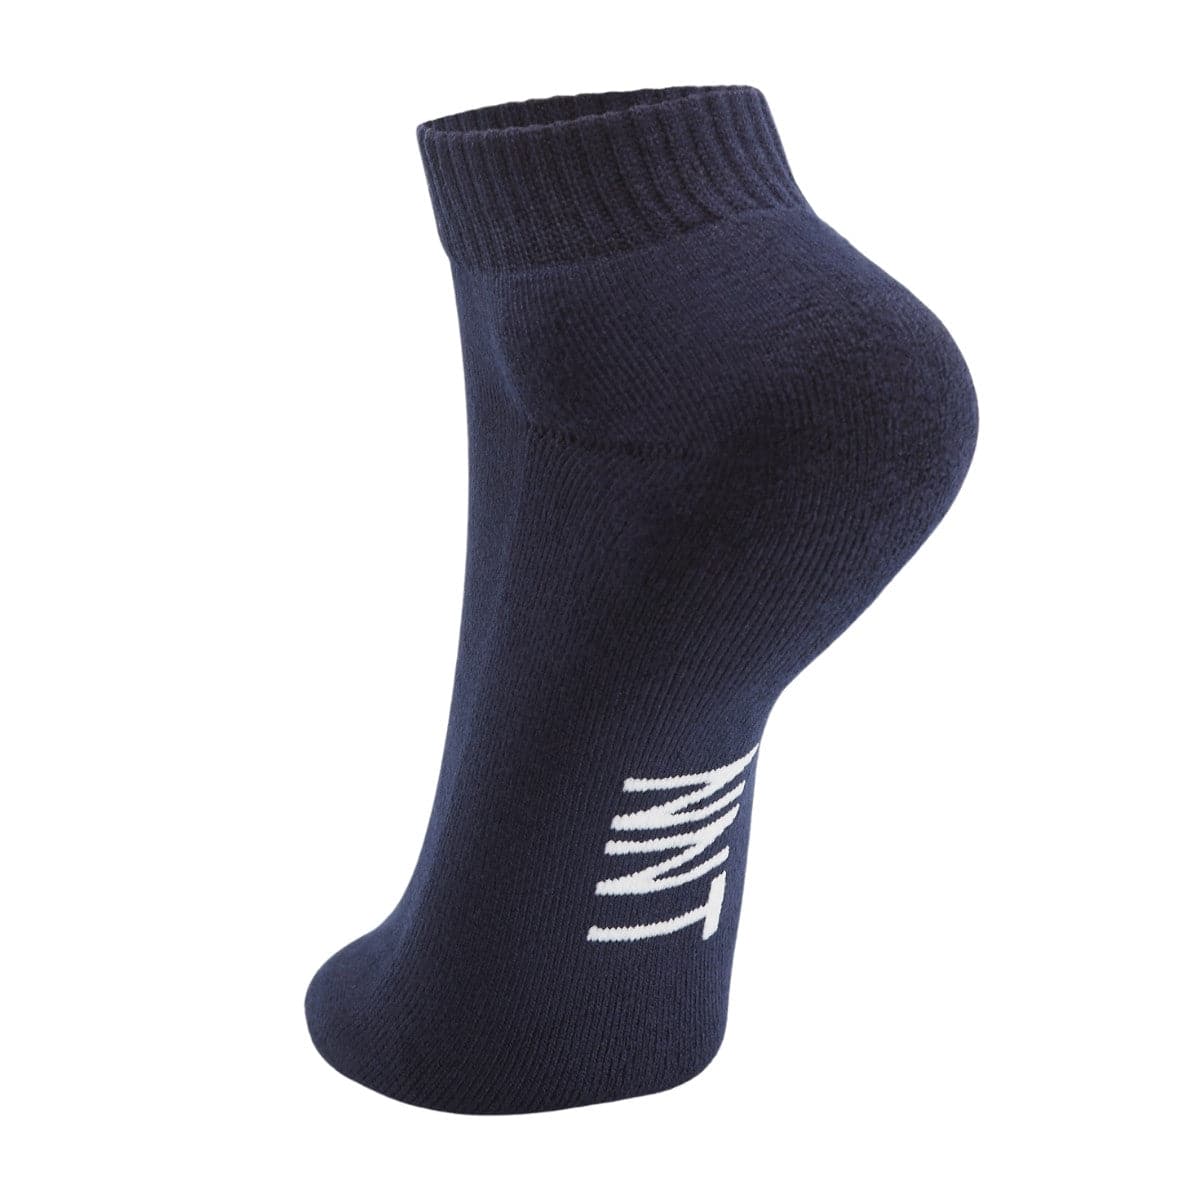 NNT Bamboo Ankle Socks CATKFN (Pack of 3)